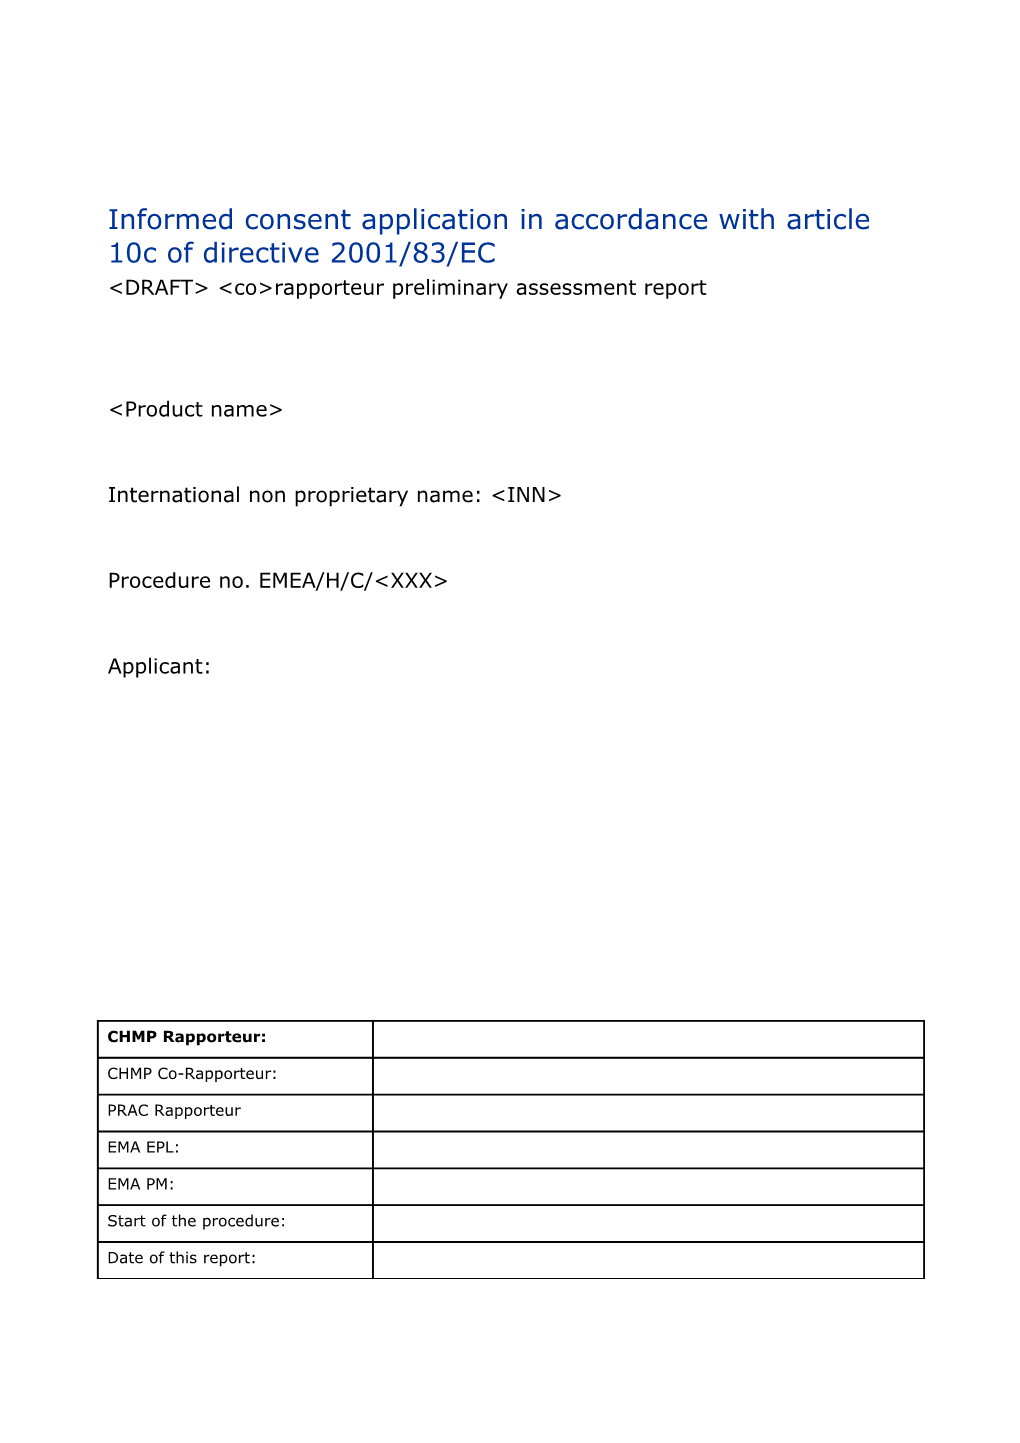 Informed Consent Application in Accordance with Article 10C of Directive 2001-83-EC Rev 10.16